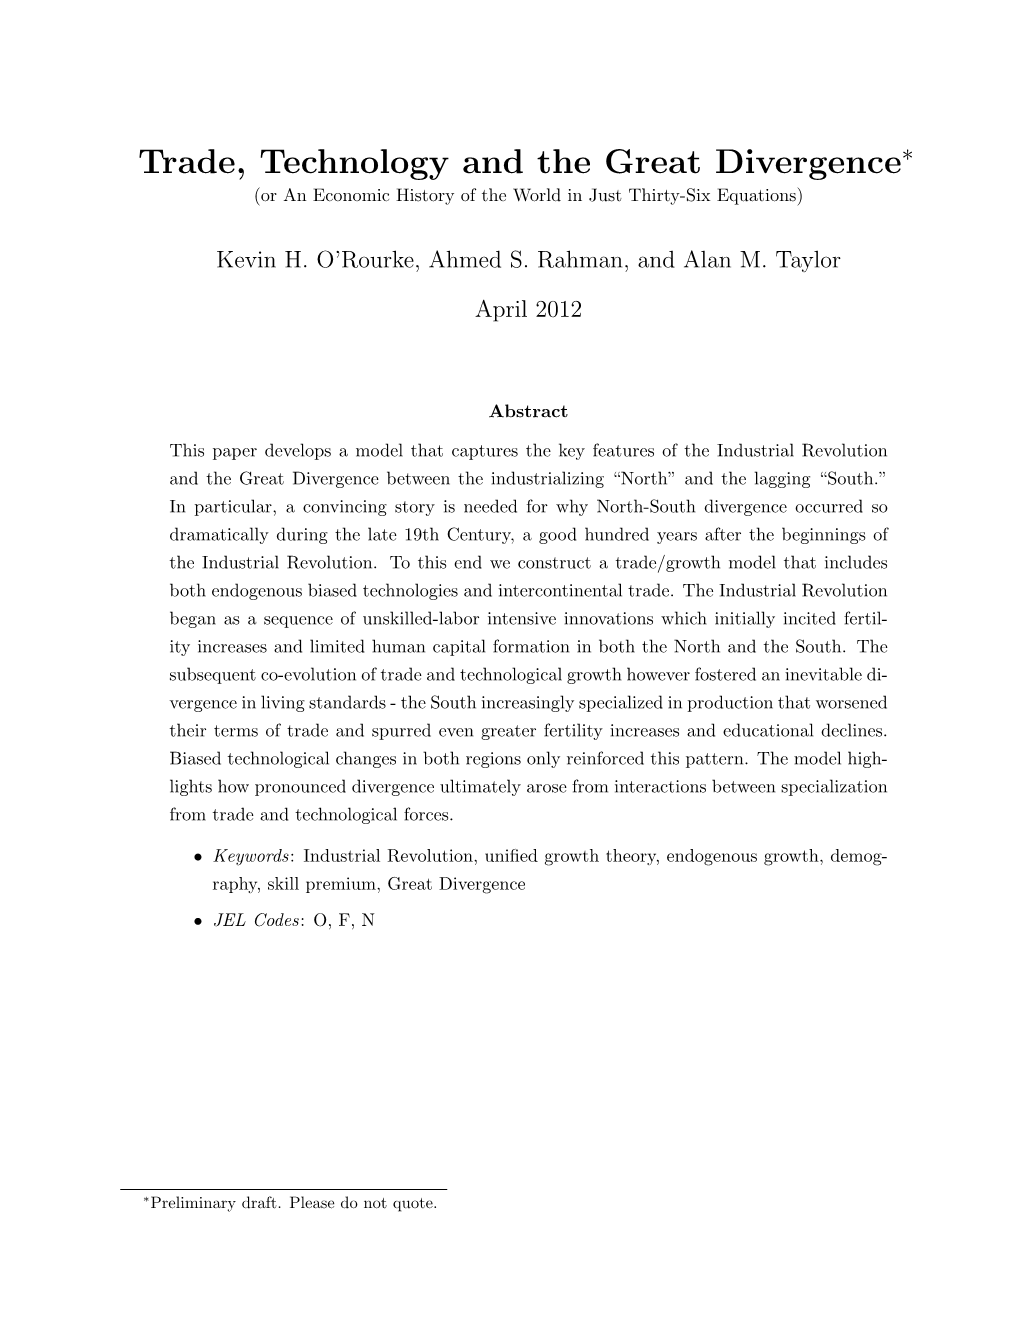 Trade, Technology and the Great Divergence∗ (Or an Economic History of the World in Just Thirty-Six Equations)